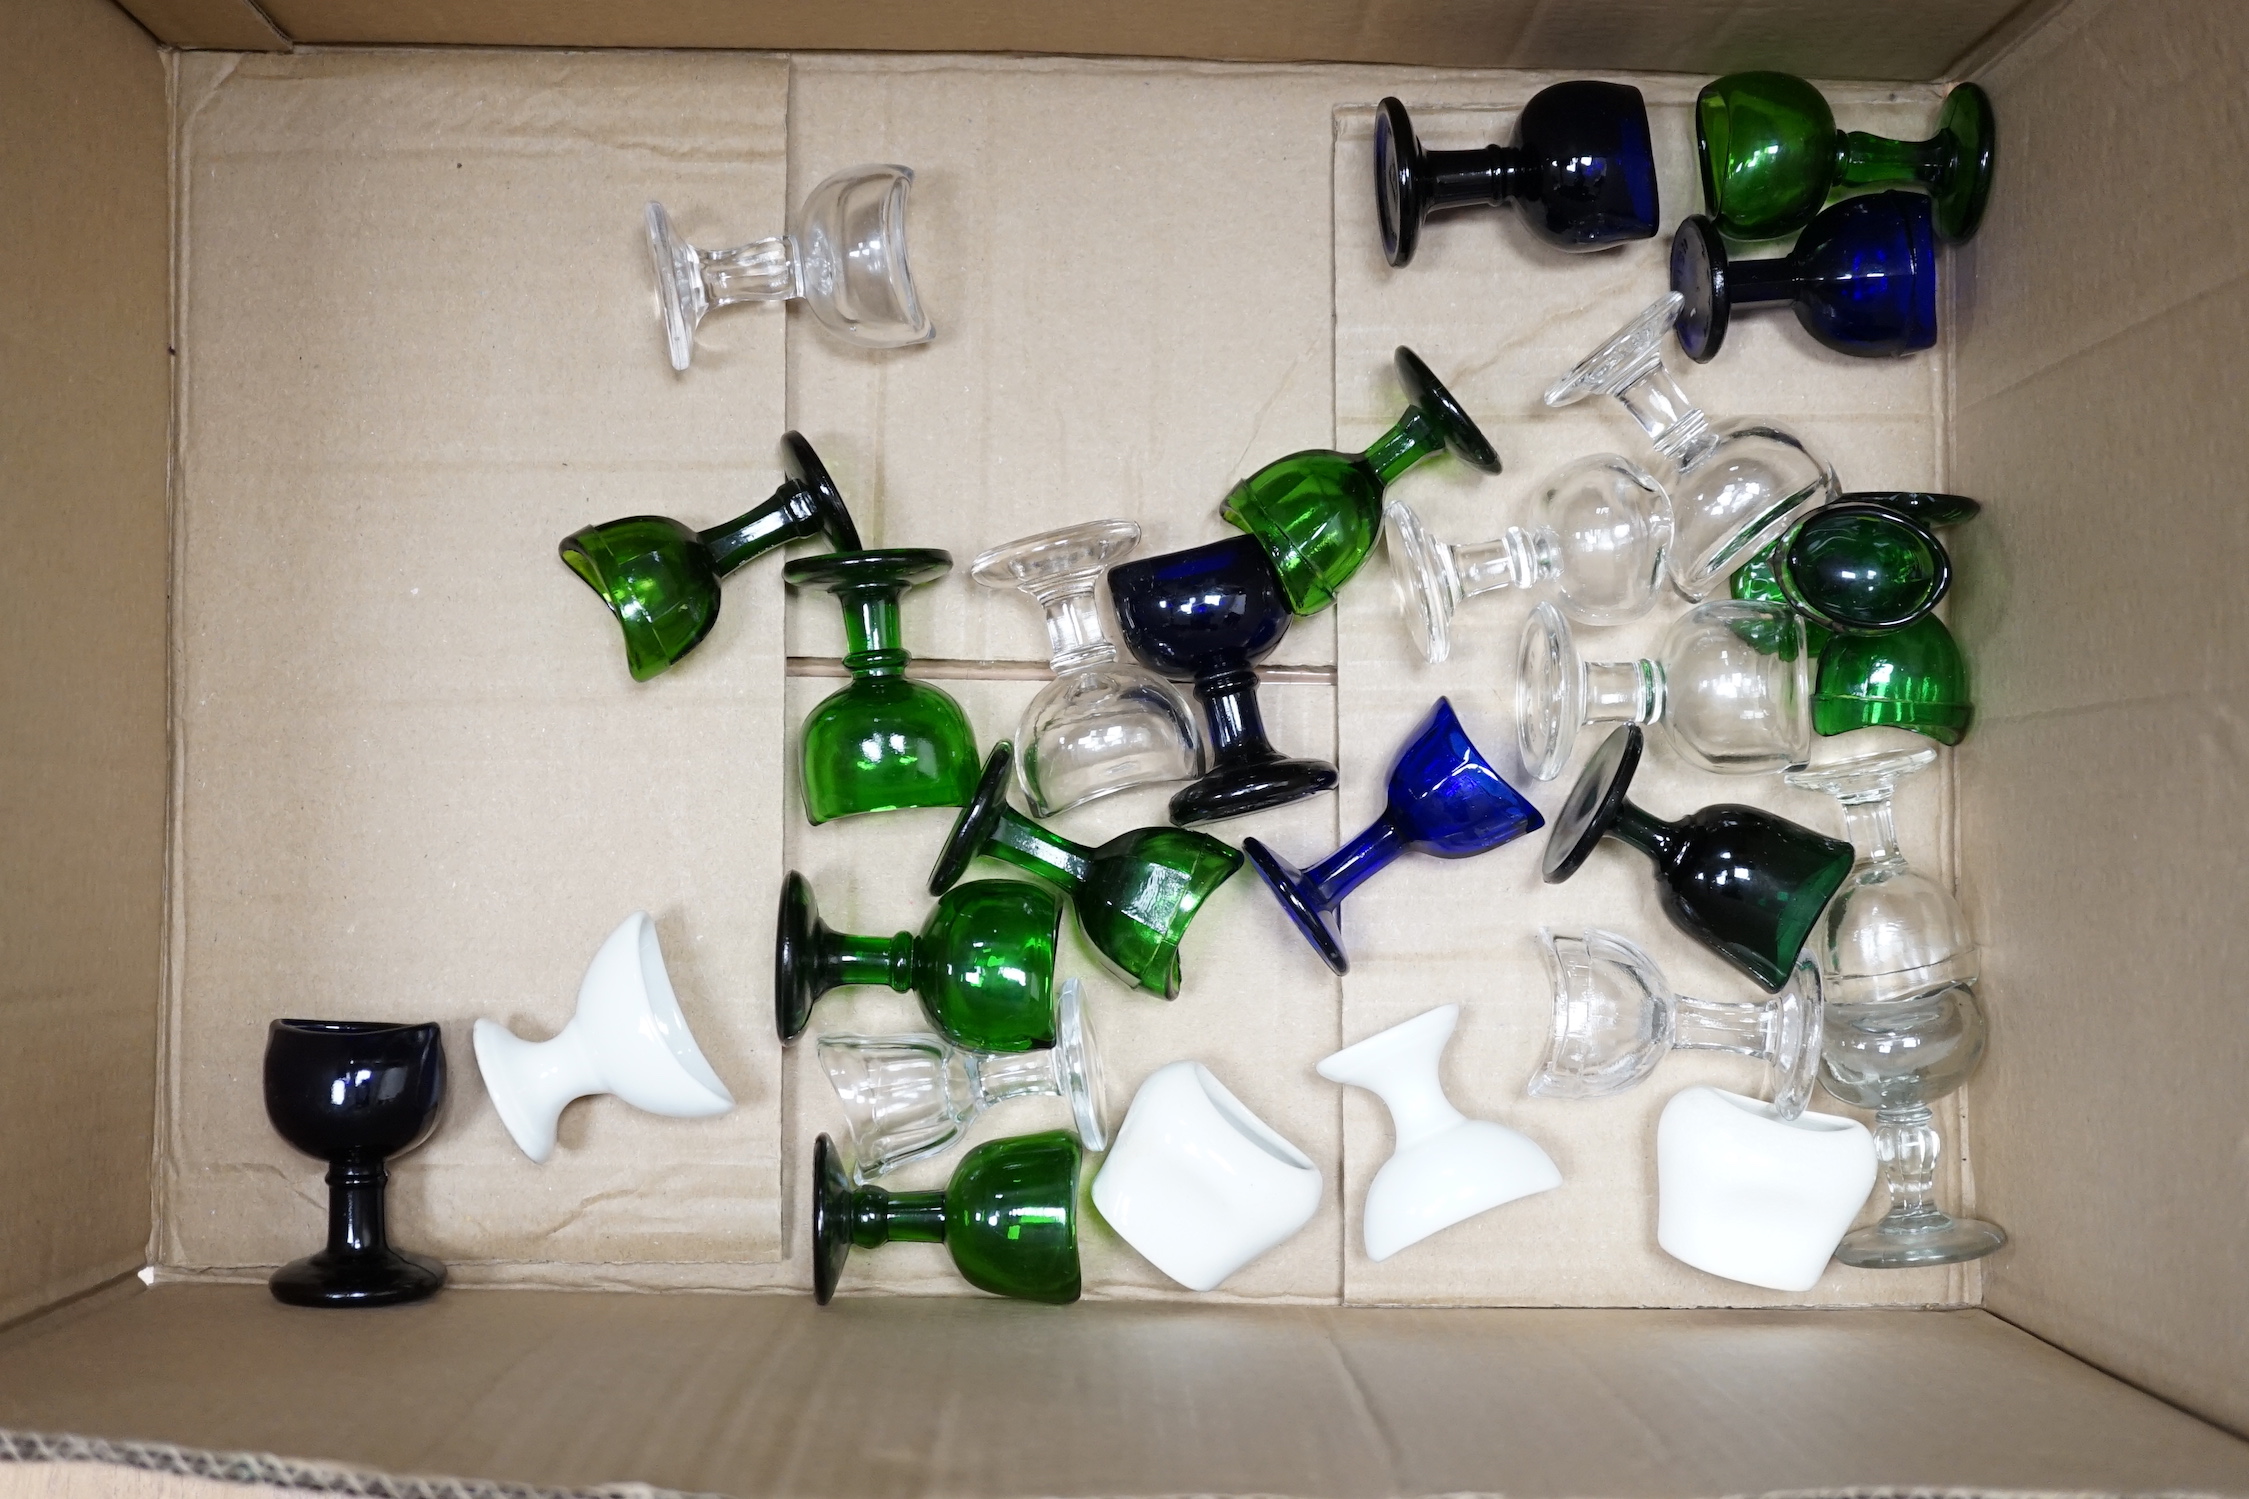 Thirty-four glass and porcelain eye baths, including green and blue glass examples